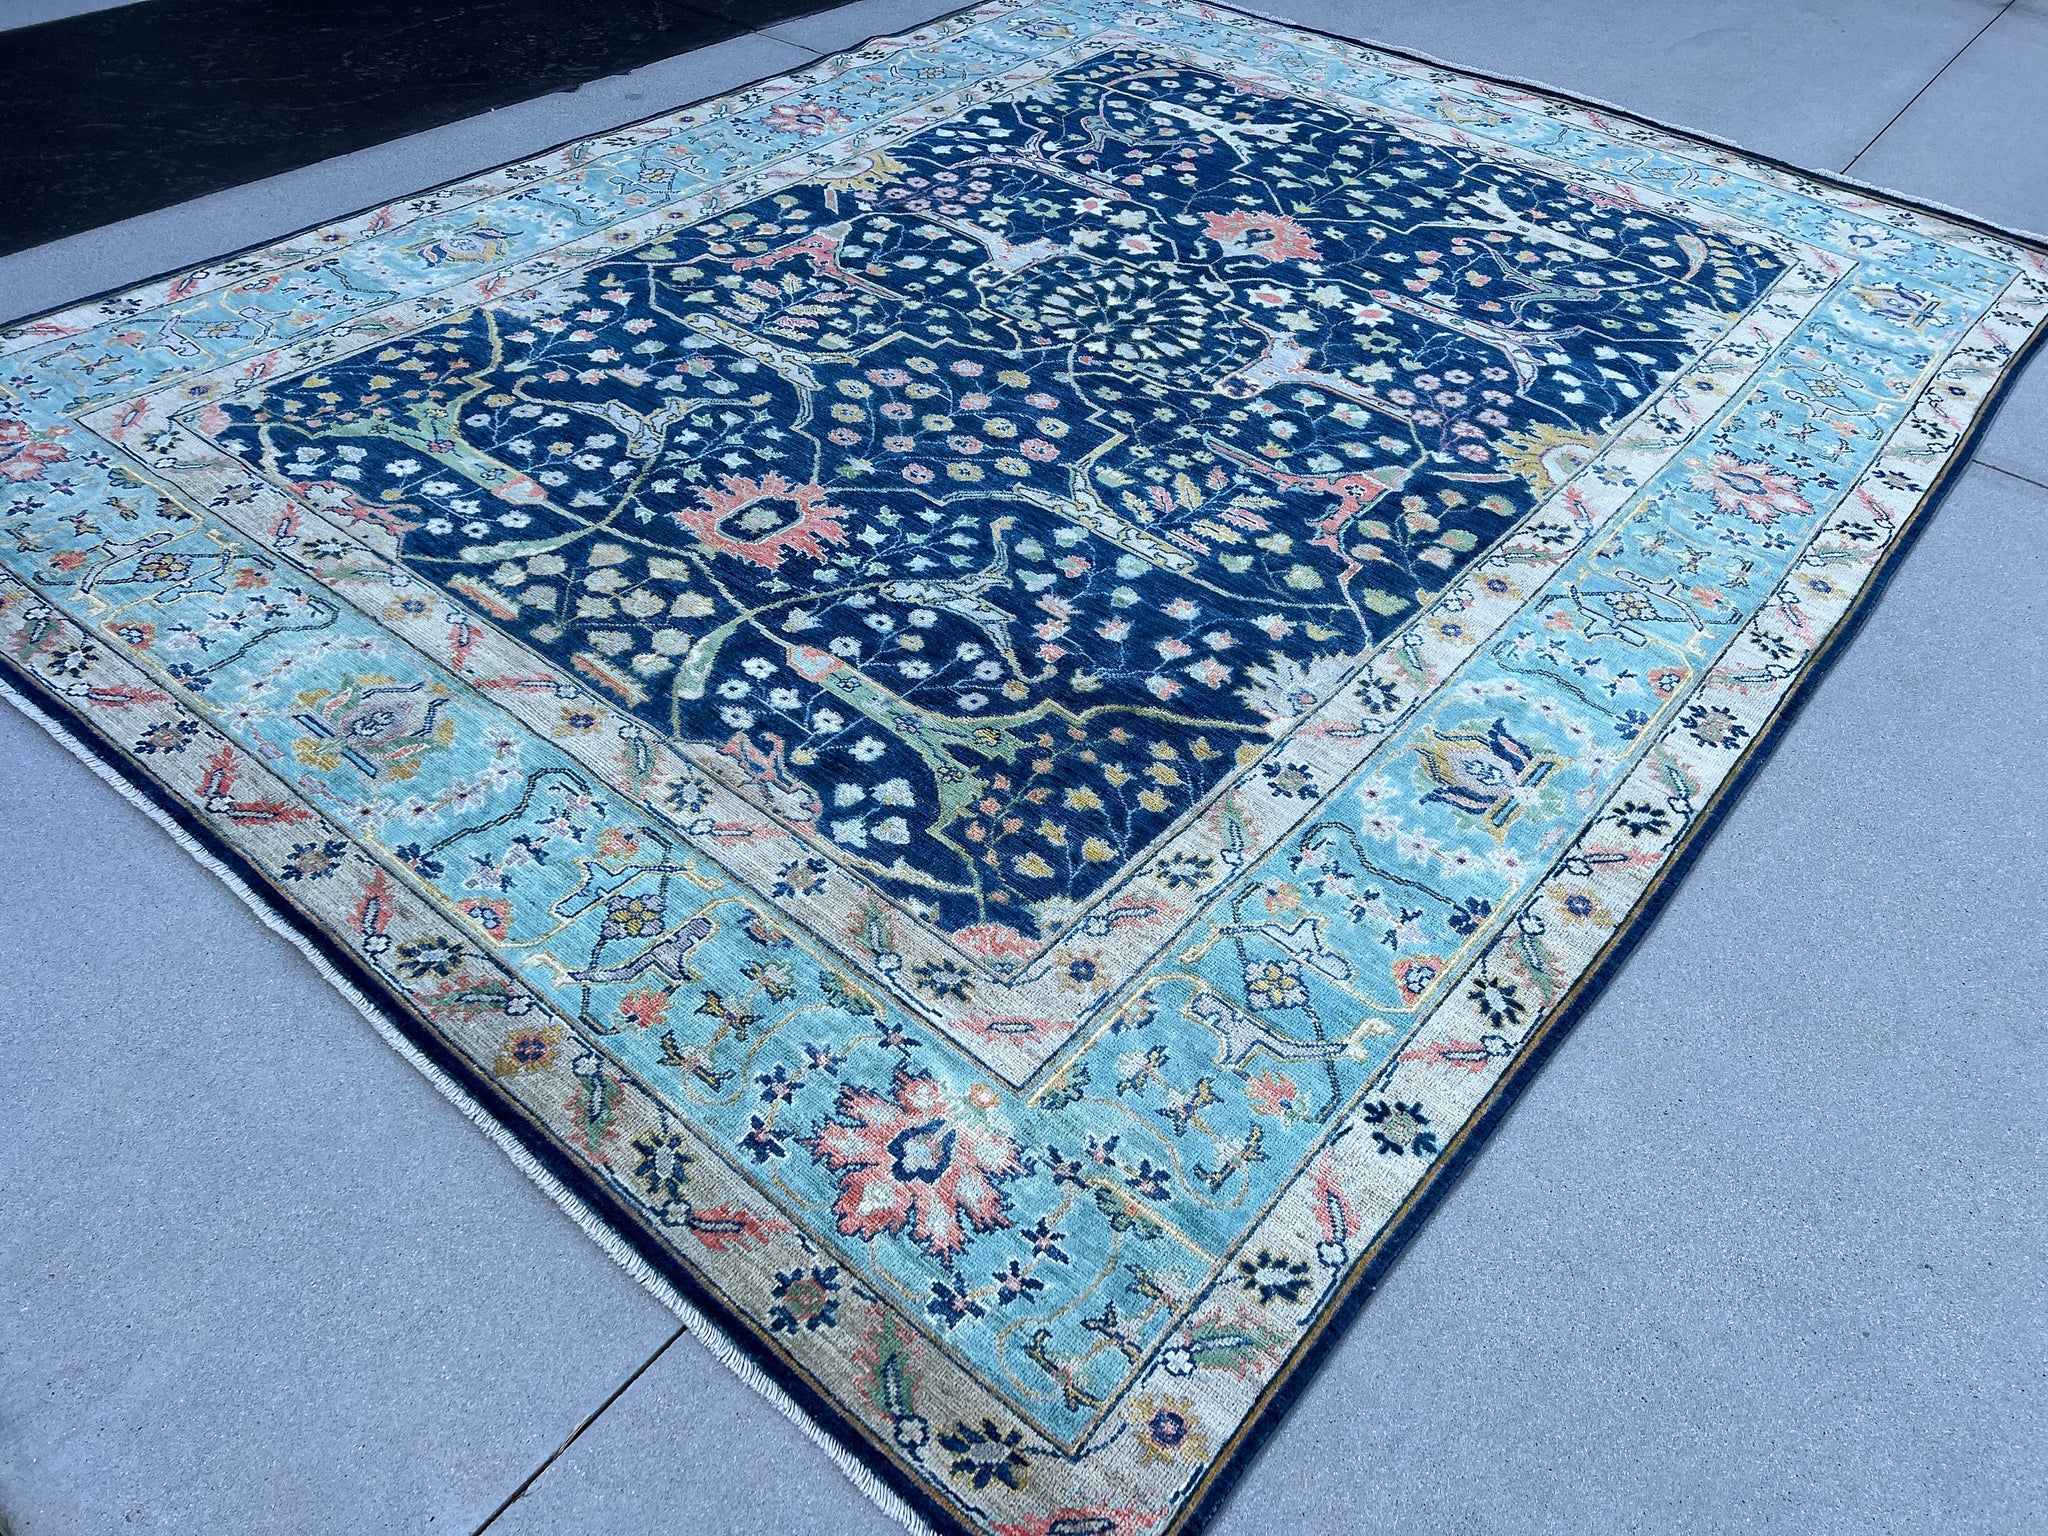 9x12 (270x365) Handmade Afghan Rug | Midnight Navy Sky Blue Grey Ivory Cream Mustard Yellow Salmon Pink Green | Turkish Floral Knotted Wool